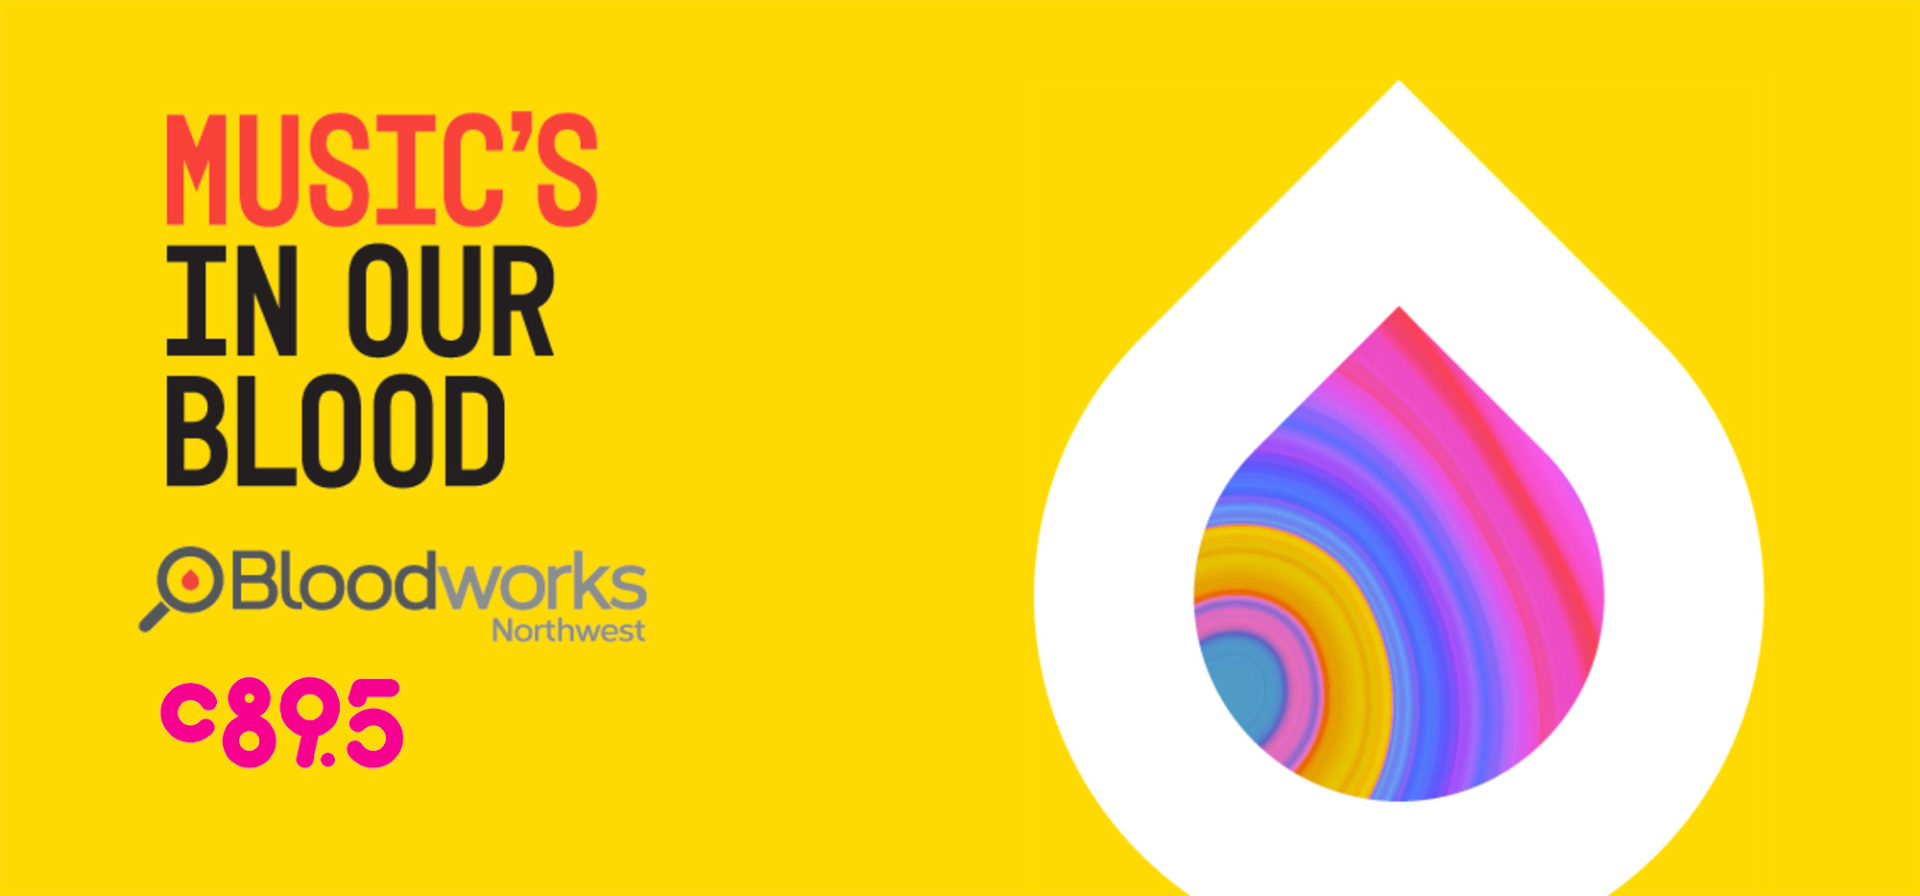 A yellow background with a rainbow teardrop and the words "Music's In Our Blood" with the Bloodworks NW and c895 logos